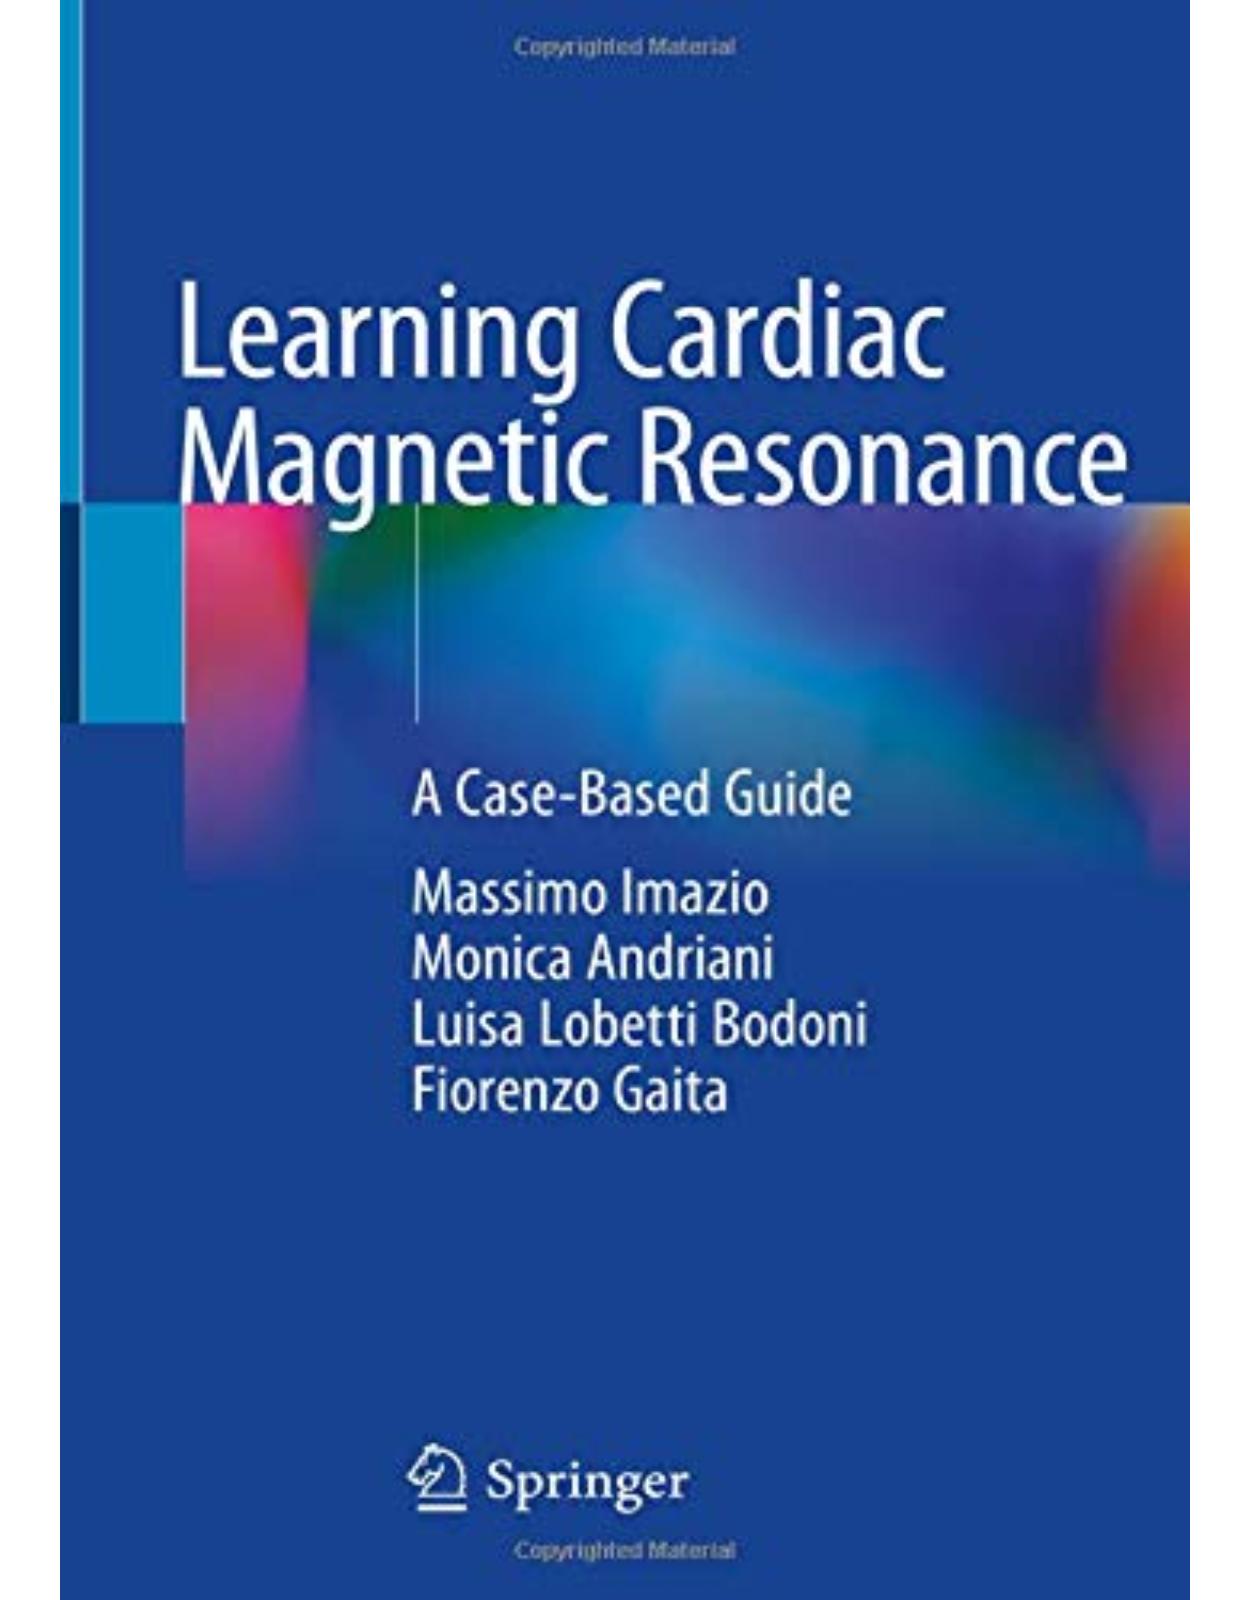 Learning Cardiac Magnetic Resonance: A Case-Based Guide